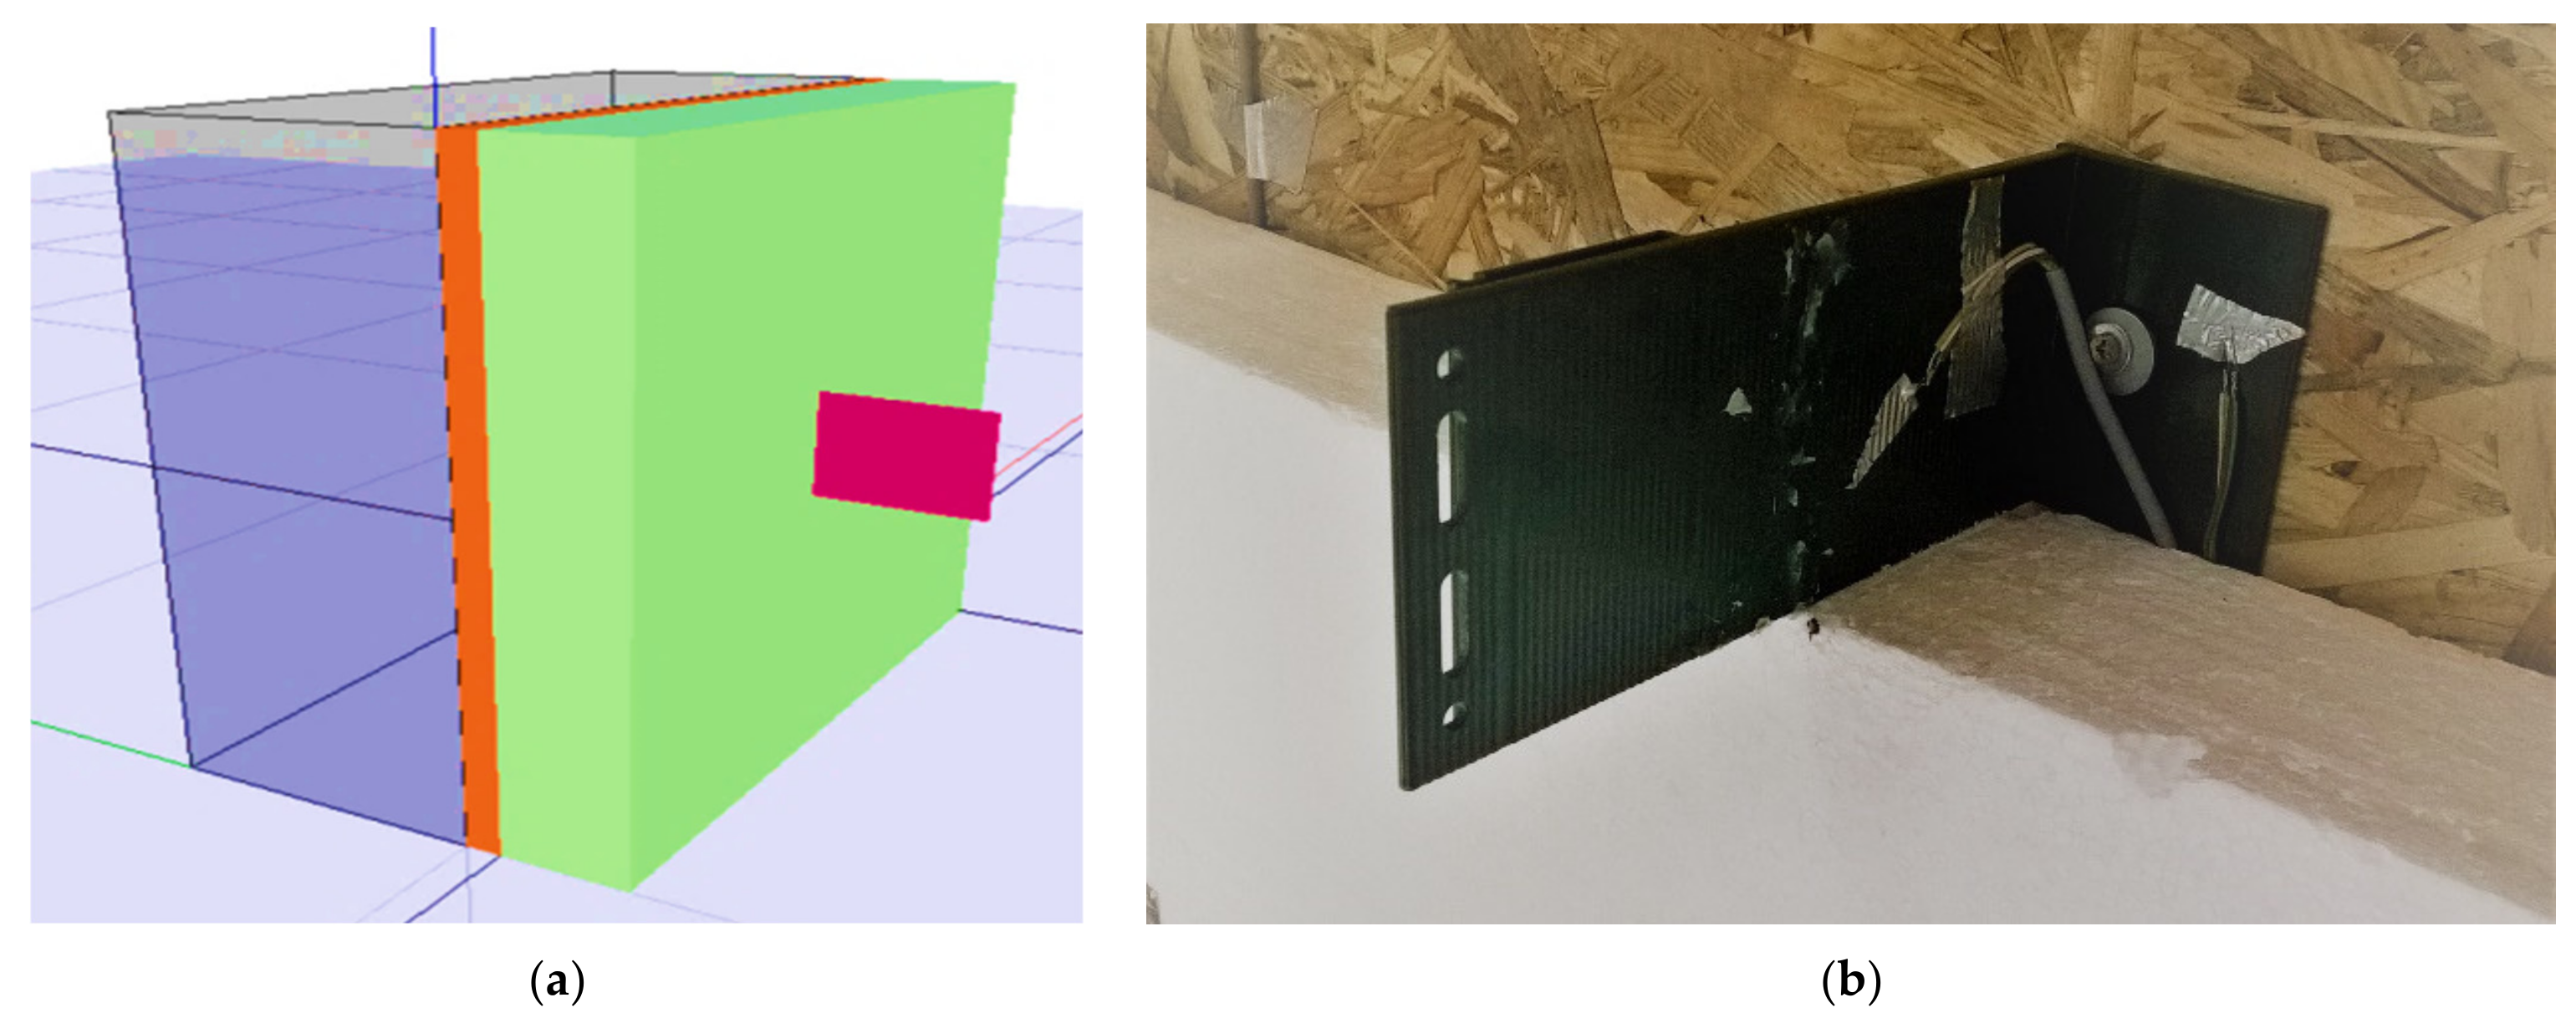 A Thermal Spacer: Reducing Point Thermal Bridges in Rainscreen